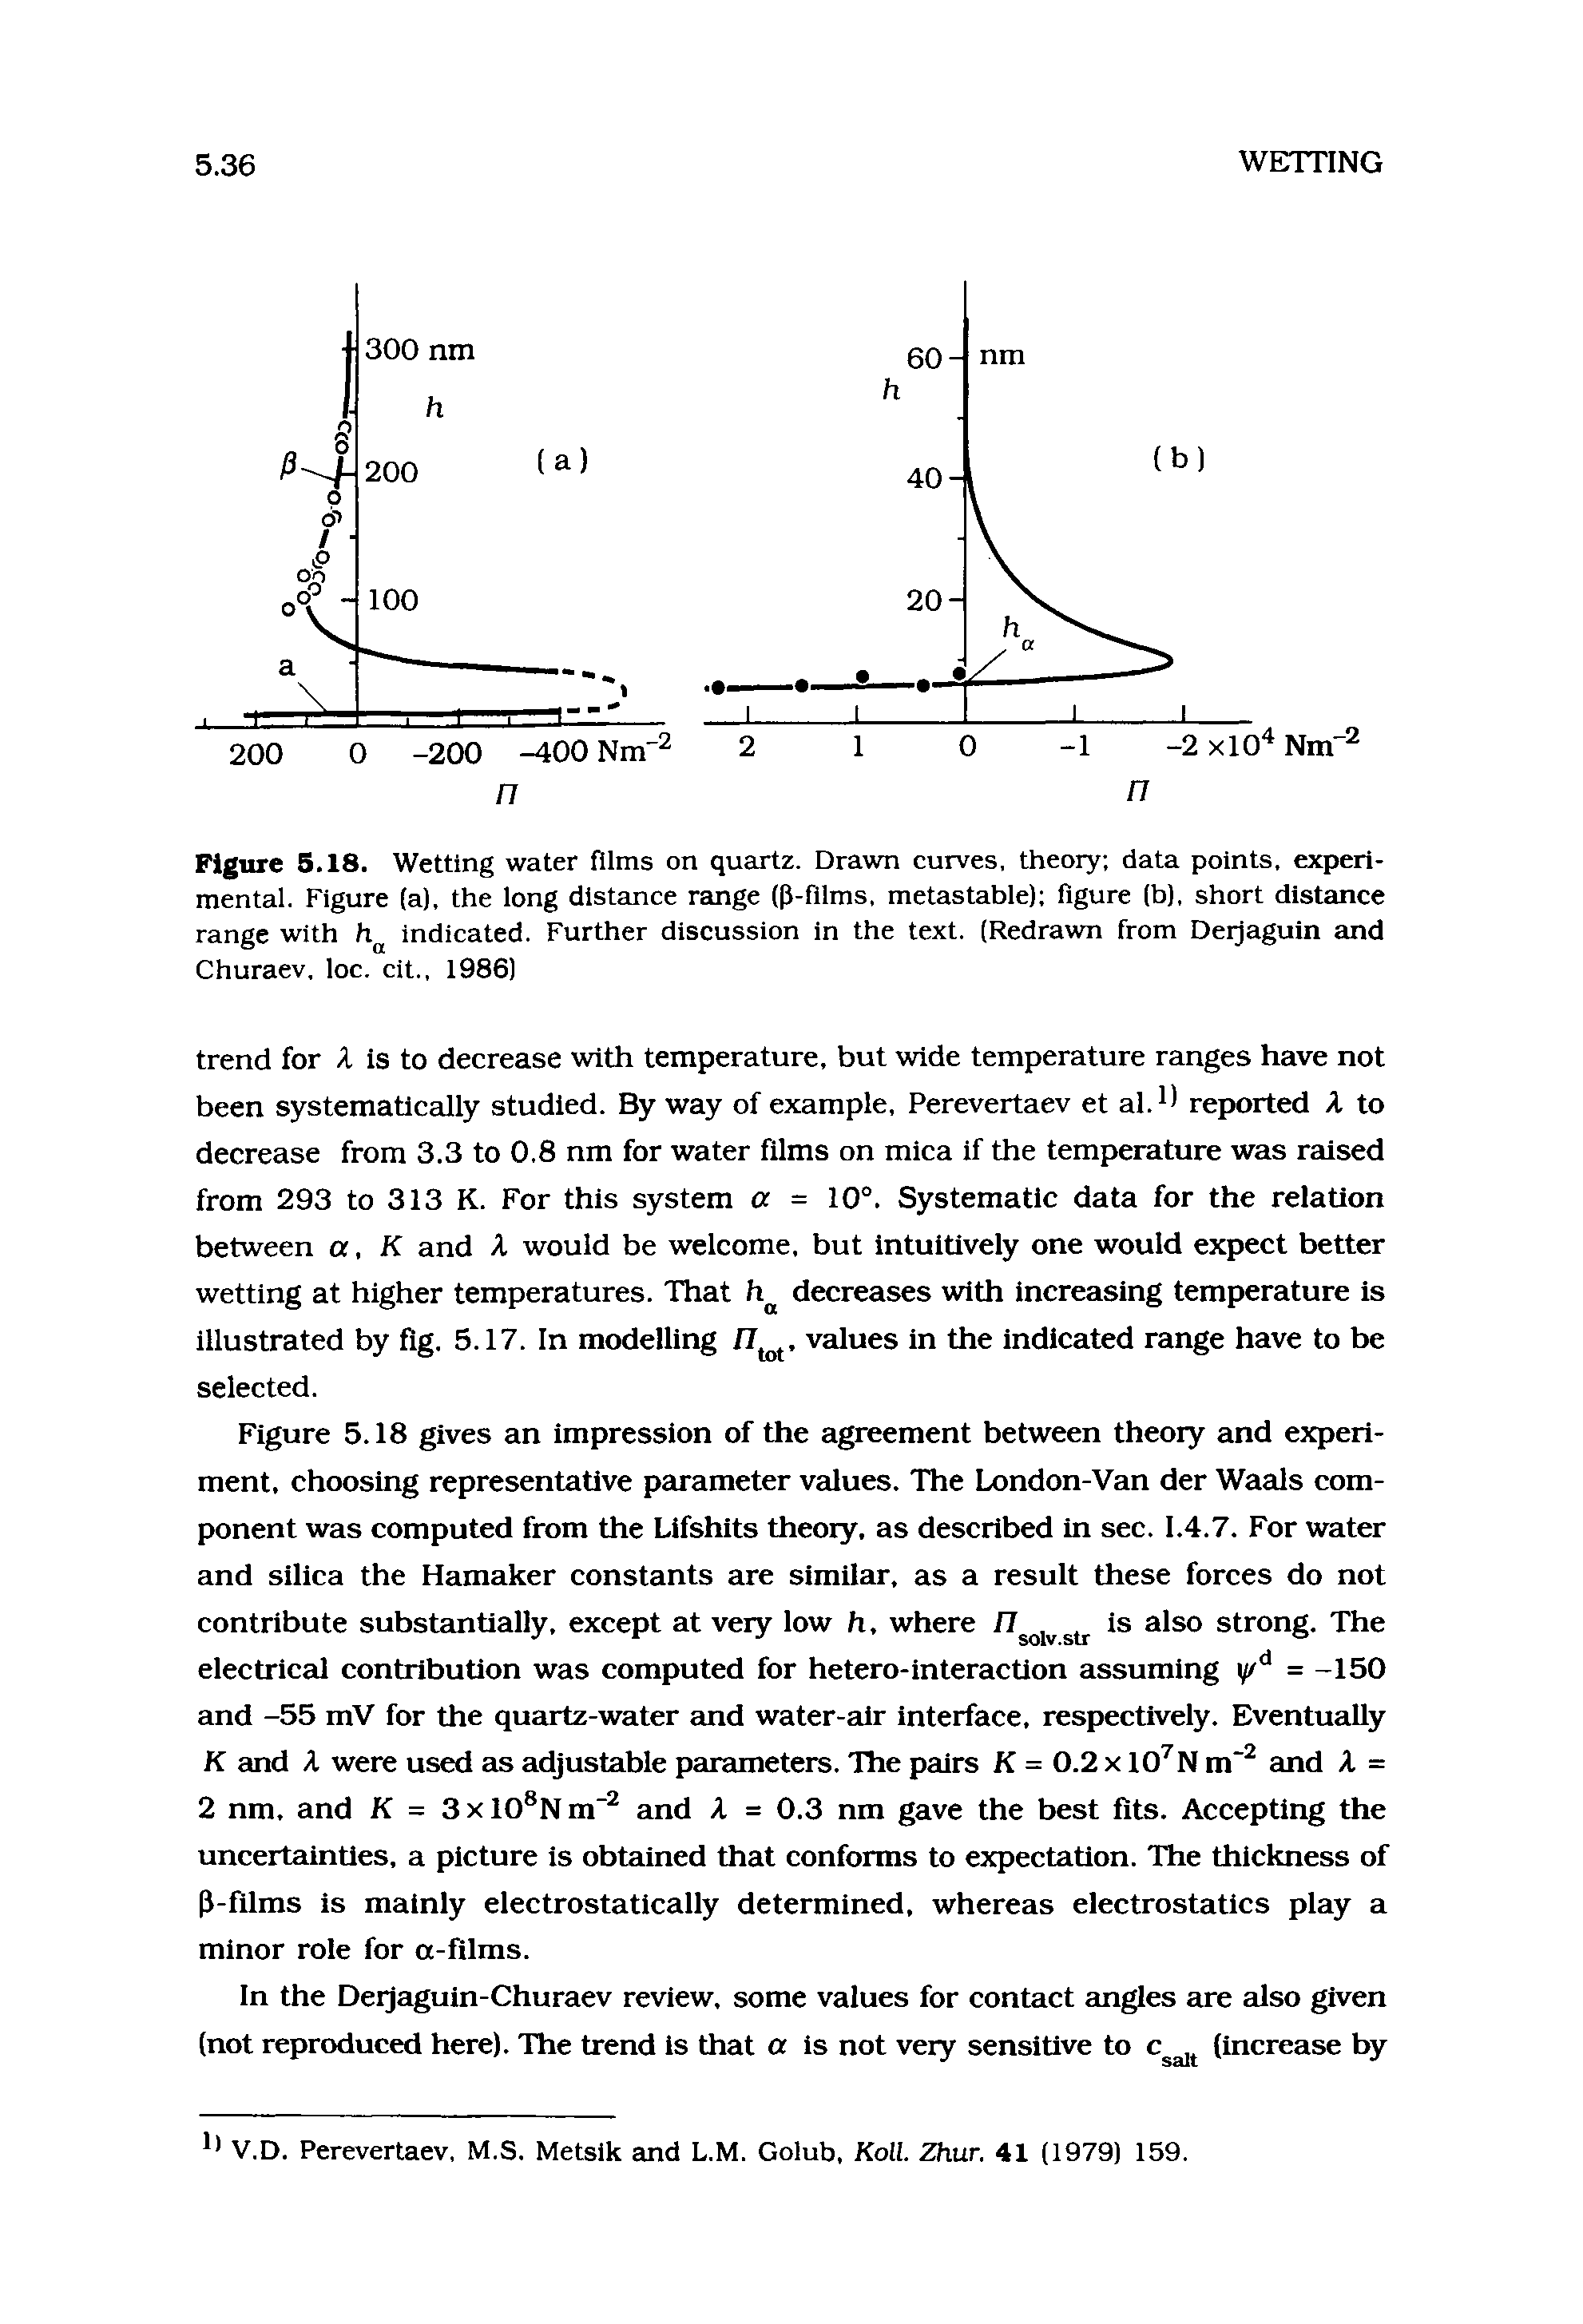 Figure 5.18. Wetting water films on quartz. Drawn curves, theory data points, experimental. Figure (a), the long distance range (P-films. metastable) figure (b). short distance range with h indicated. Further discussion in the text. (Redrawn from Derjaguln and Churaev. loc. cit.. 1986)...